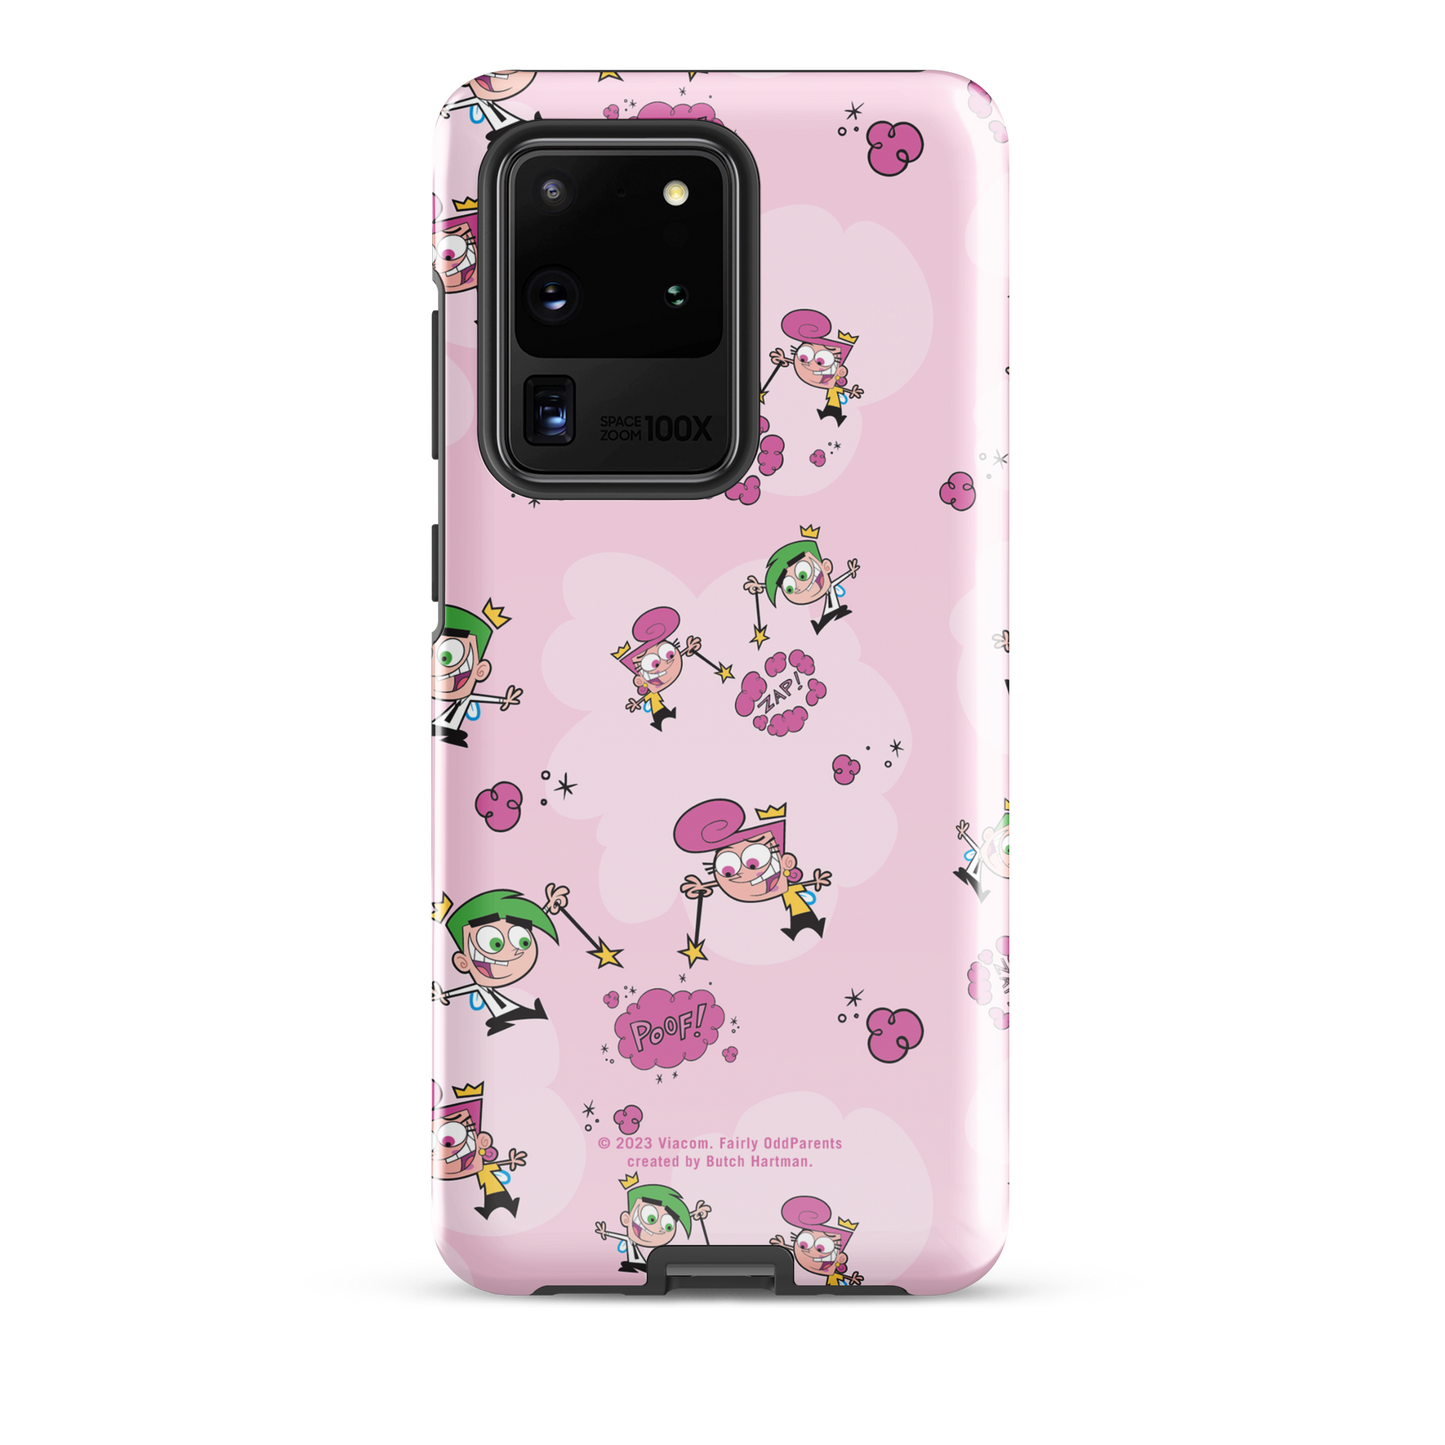 The Fairly OddParents Zap! Pattern Tough Phone Case - Samsung